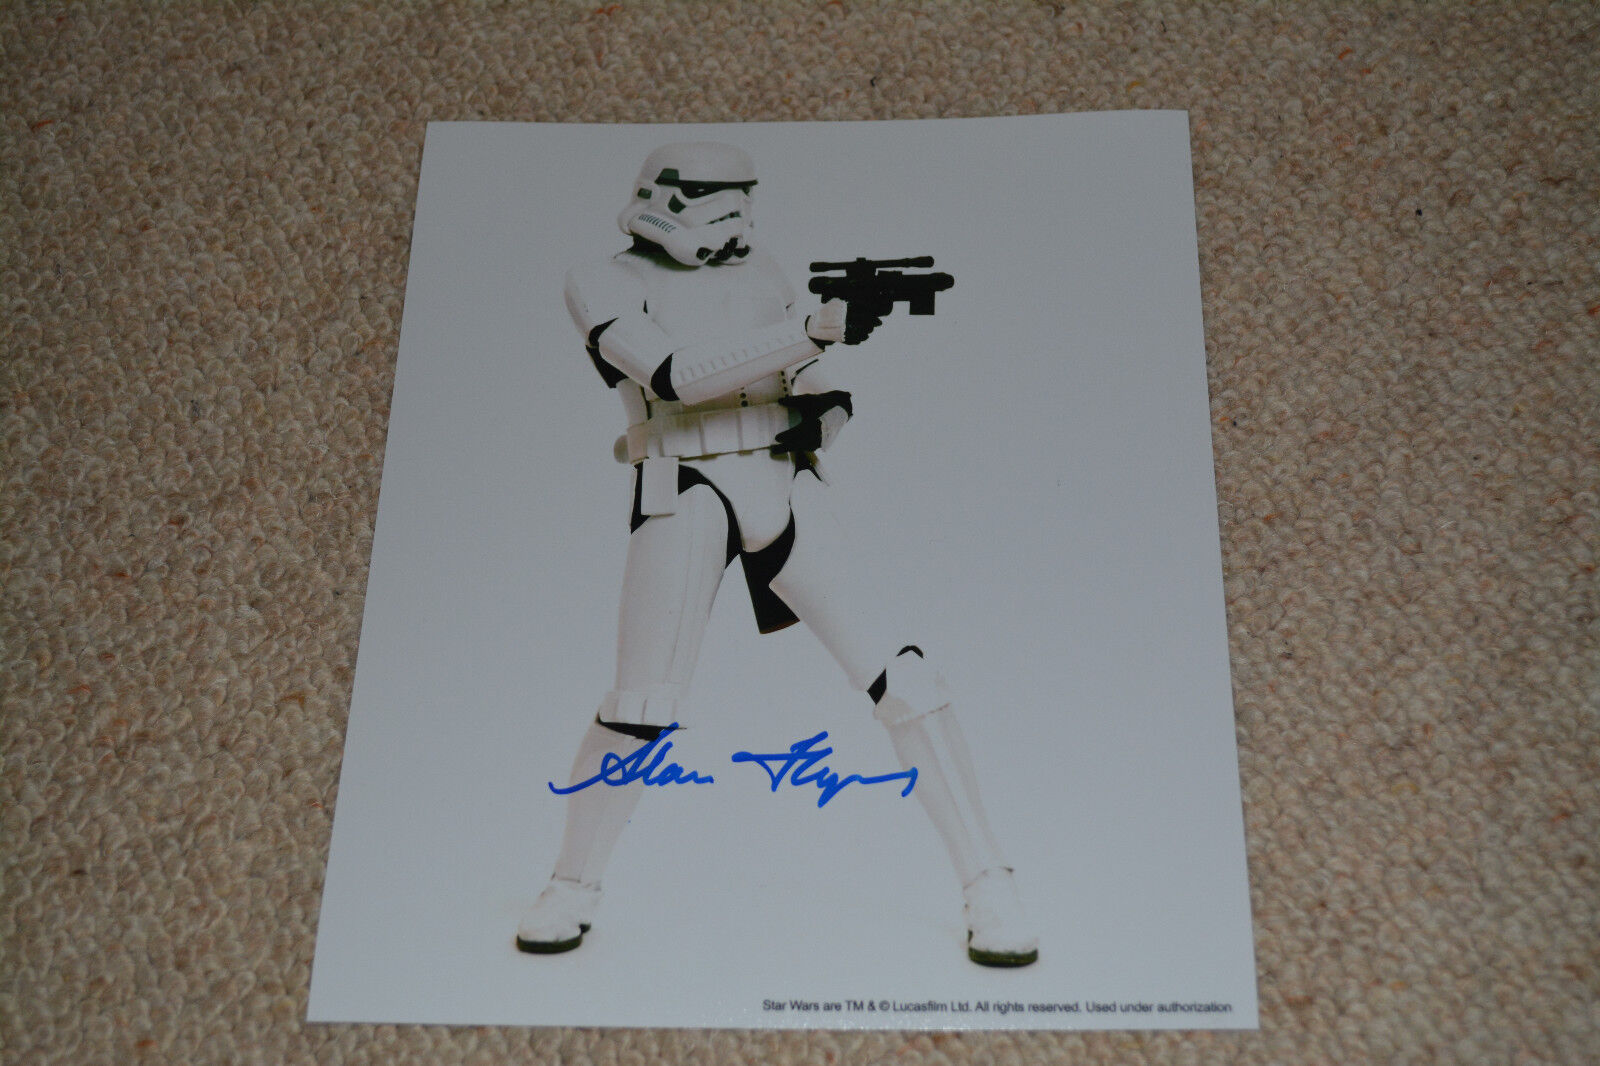 ALAN FLYNG signed autograph In Person 8x10 20x25cm STAR WARS Stormtrooper